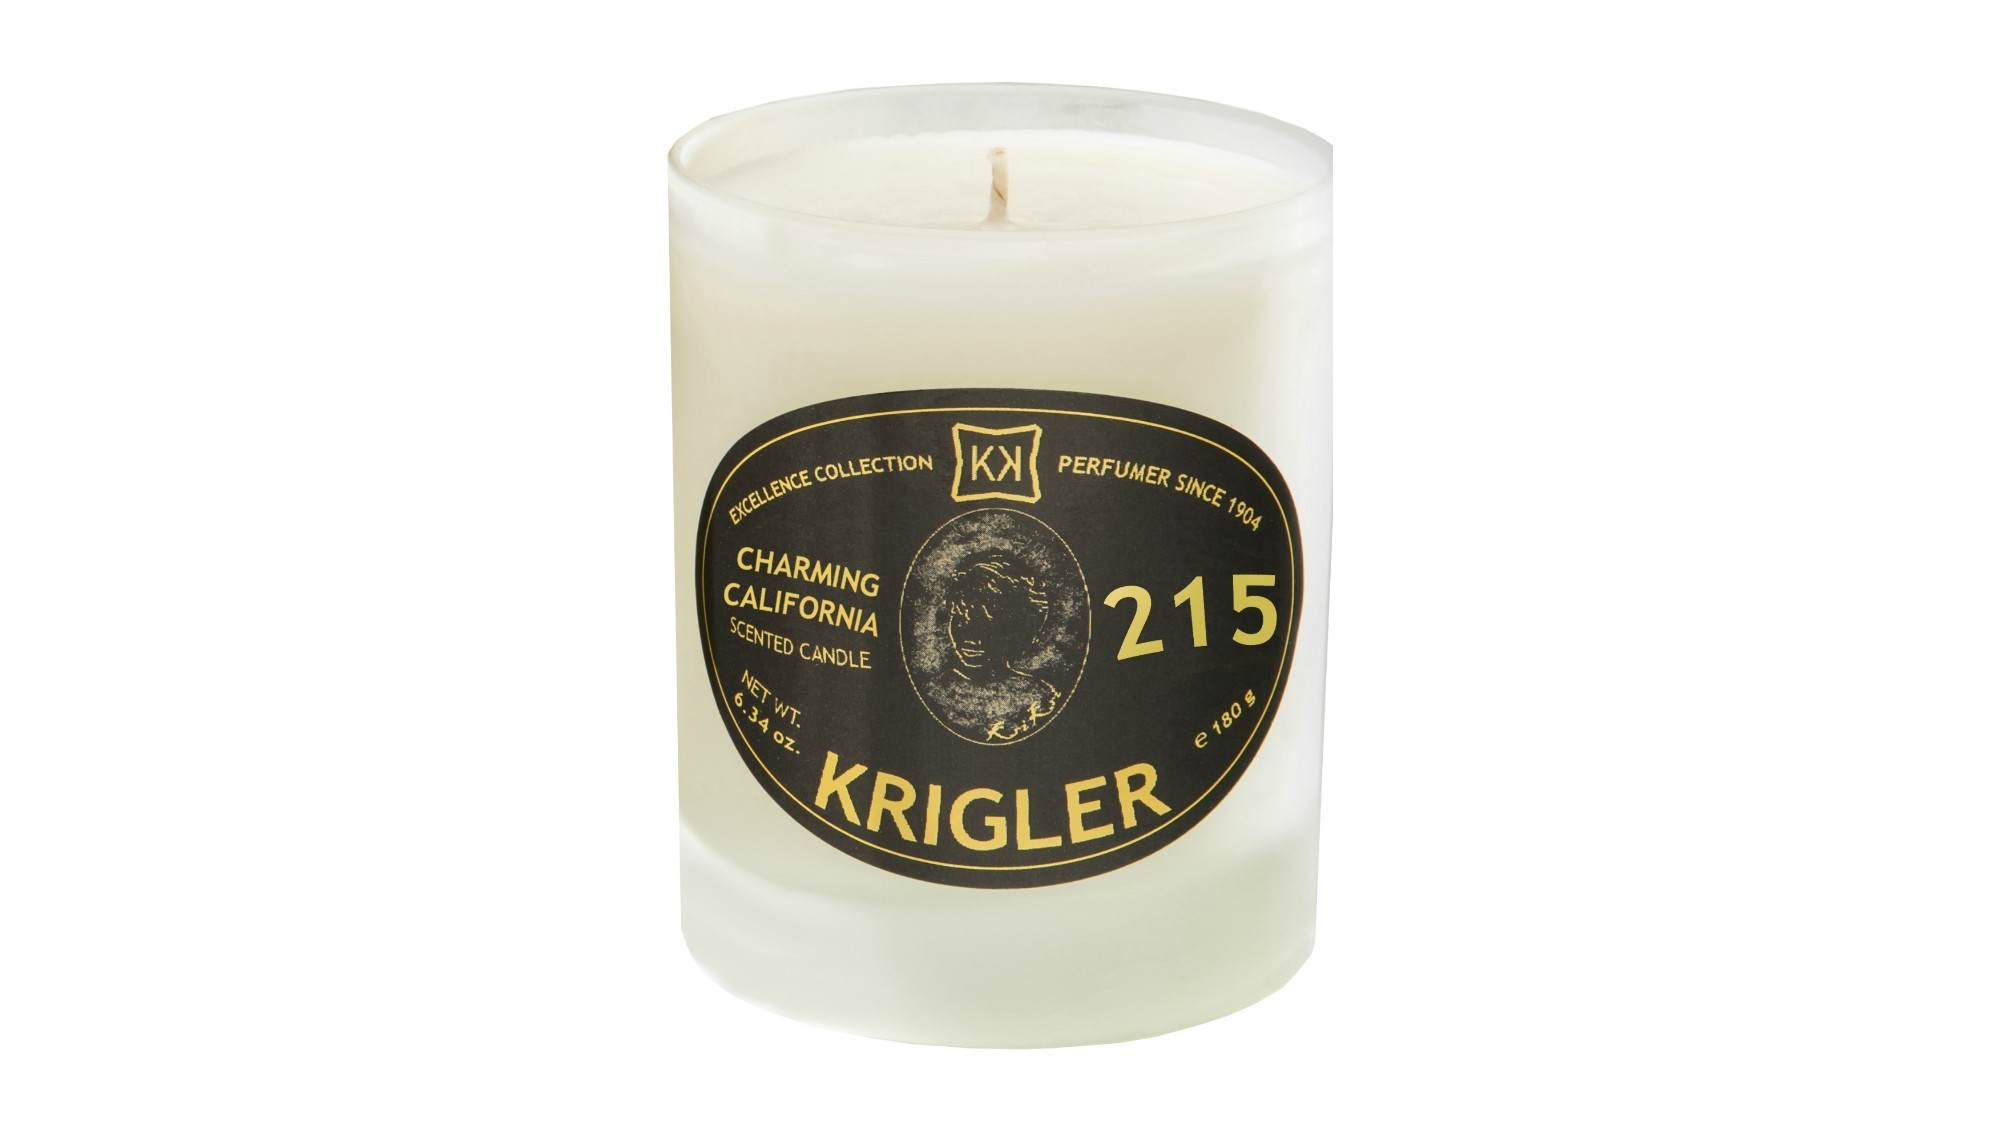 Krigler's new Charming California 215 candle has a scent inspired by blooming Jacaranda trees, $105.